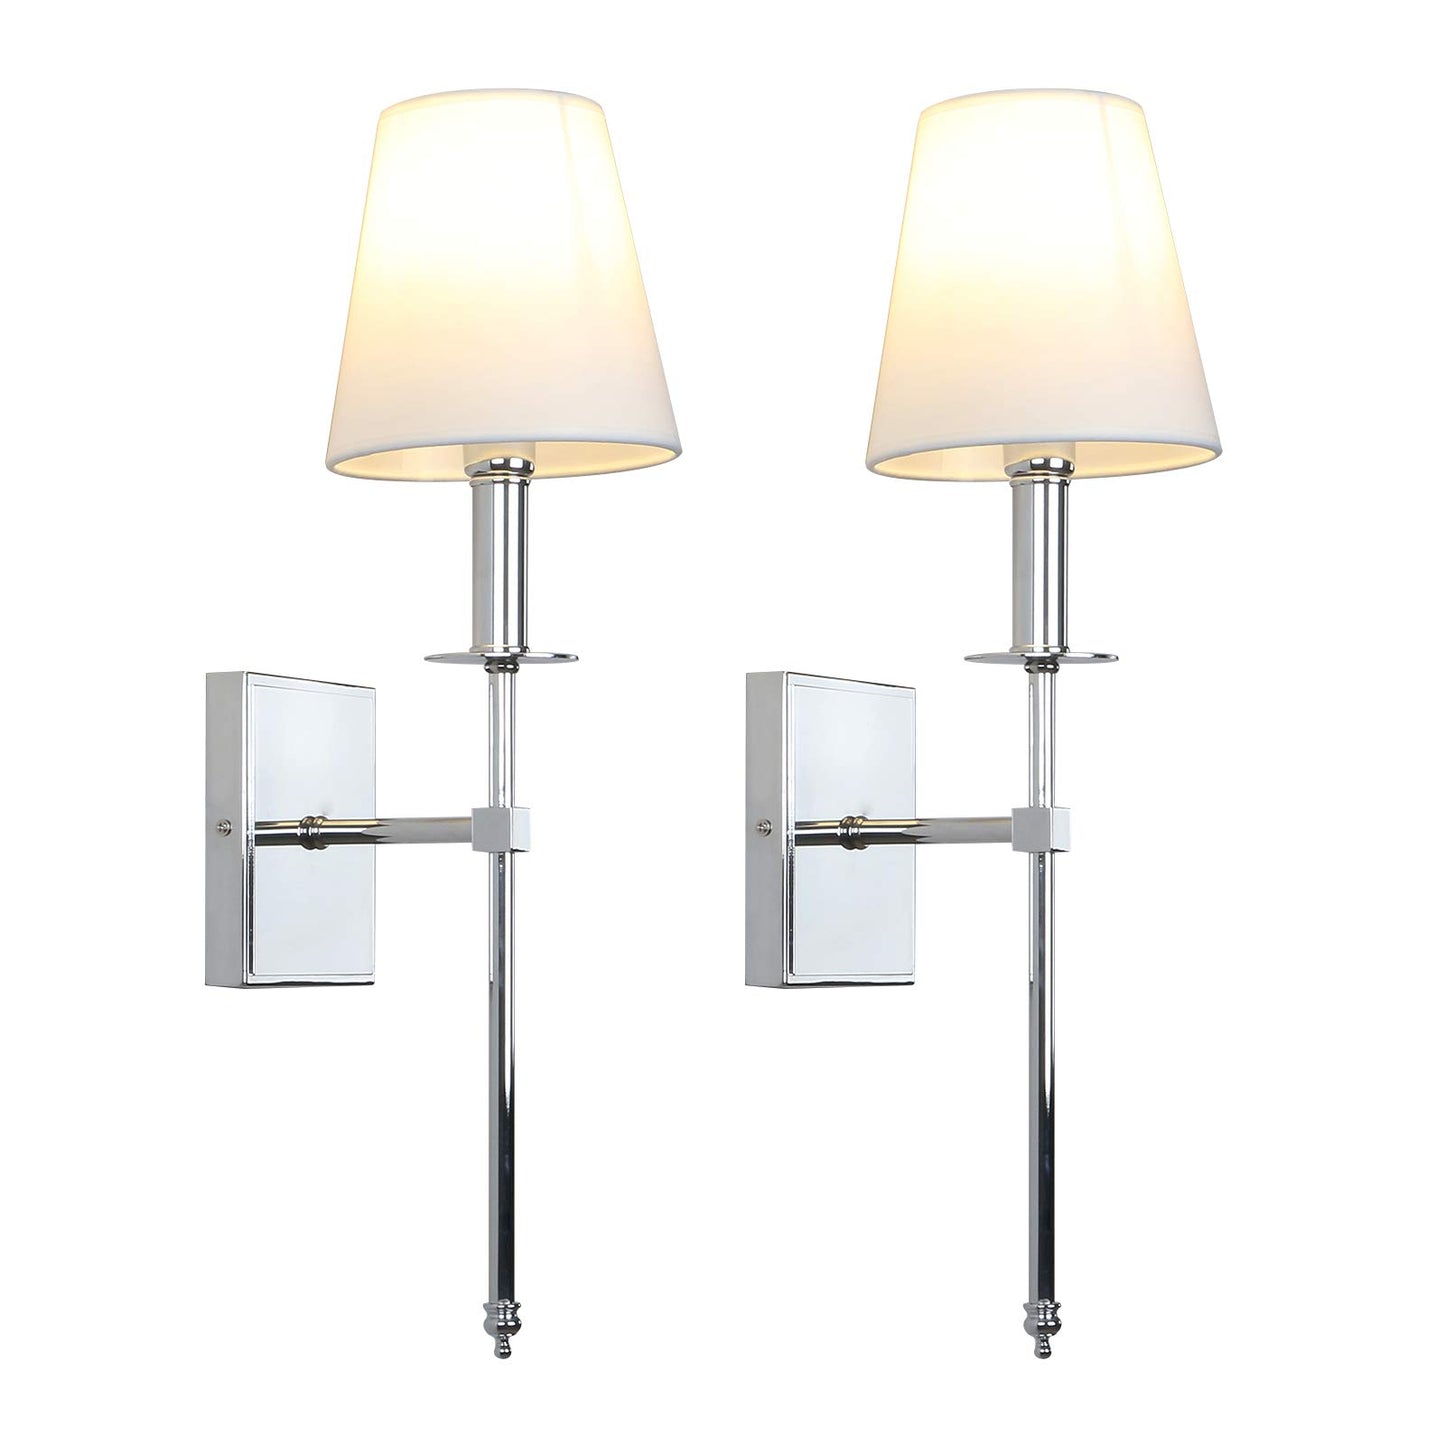 Set of 2 Classic Rustic Industrial Wall Sconce Lighting Fixture